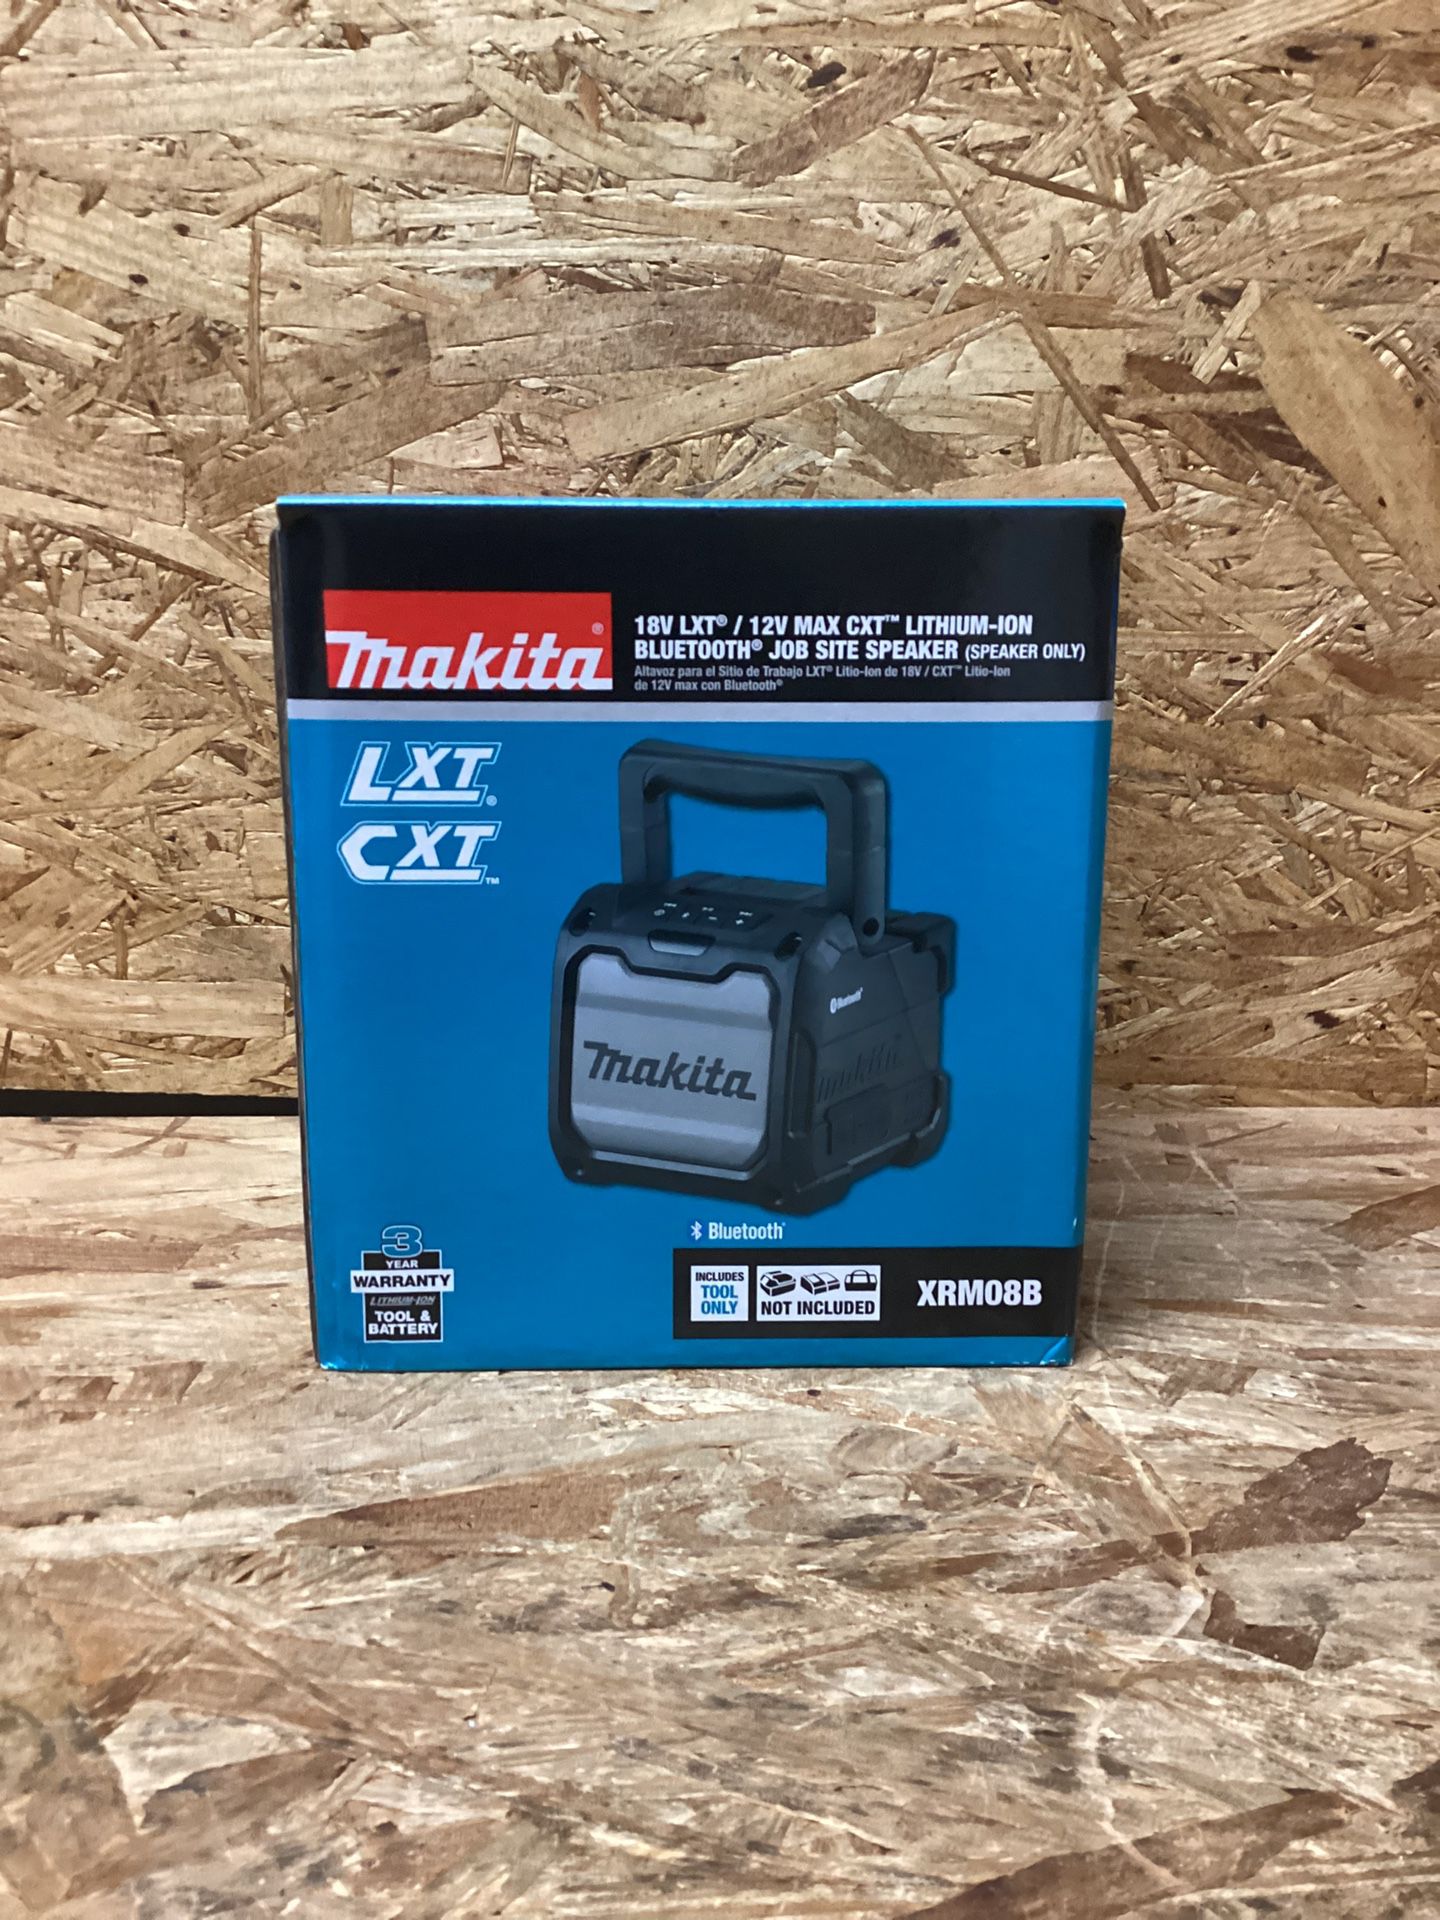 Makita 18V LXT /12V max CXT Lithium-Ion Cordless Bluetooth Job Site Speaker  (Tool Only) for Sale in Fontana, CA OfferUp